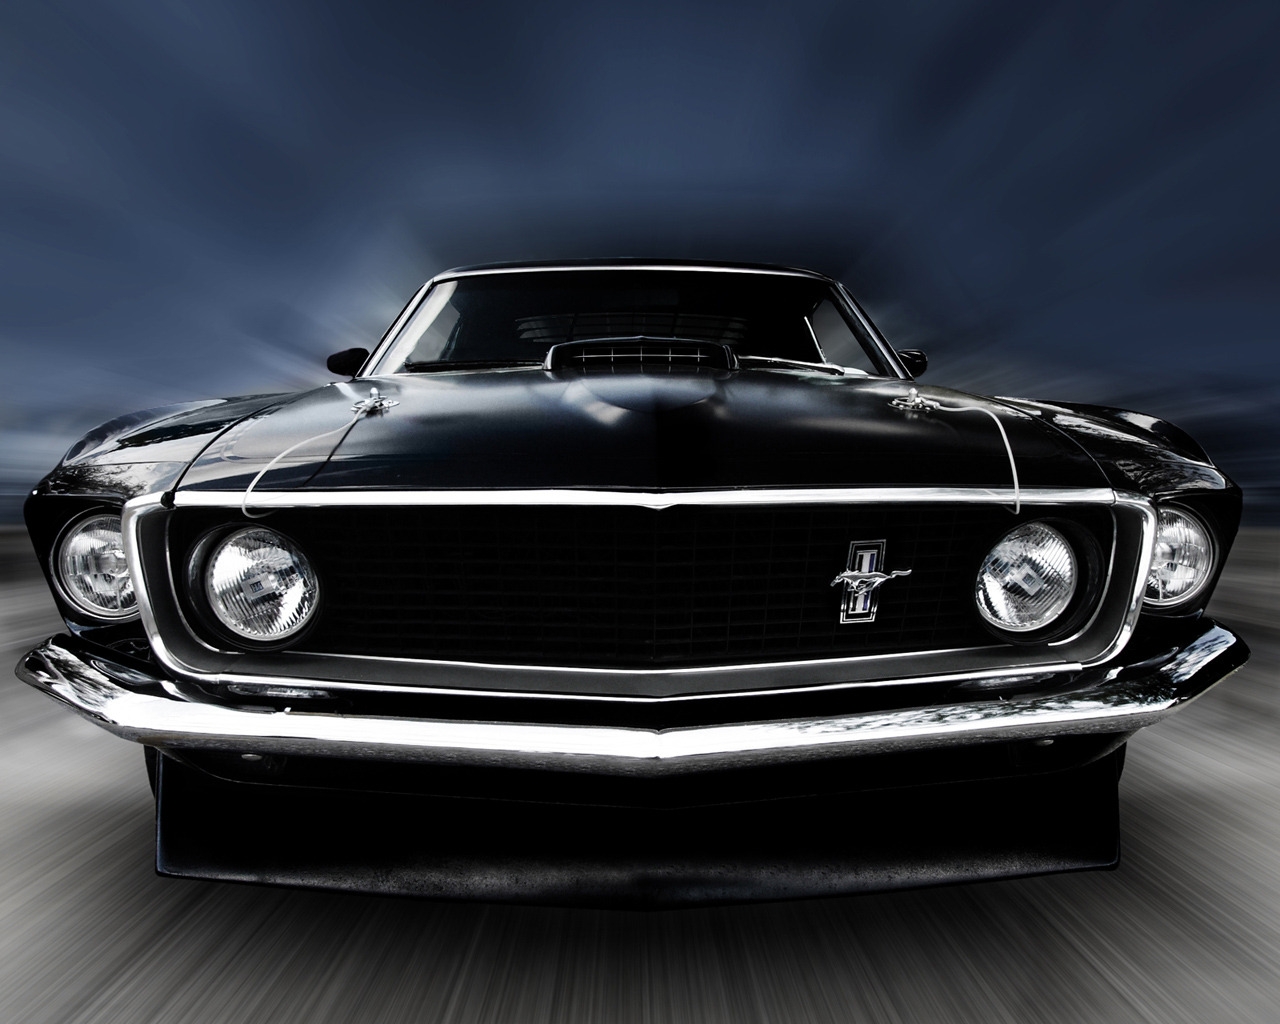 1969 Ford Mustang for 1280 x 1024 resolution